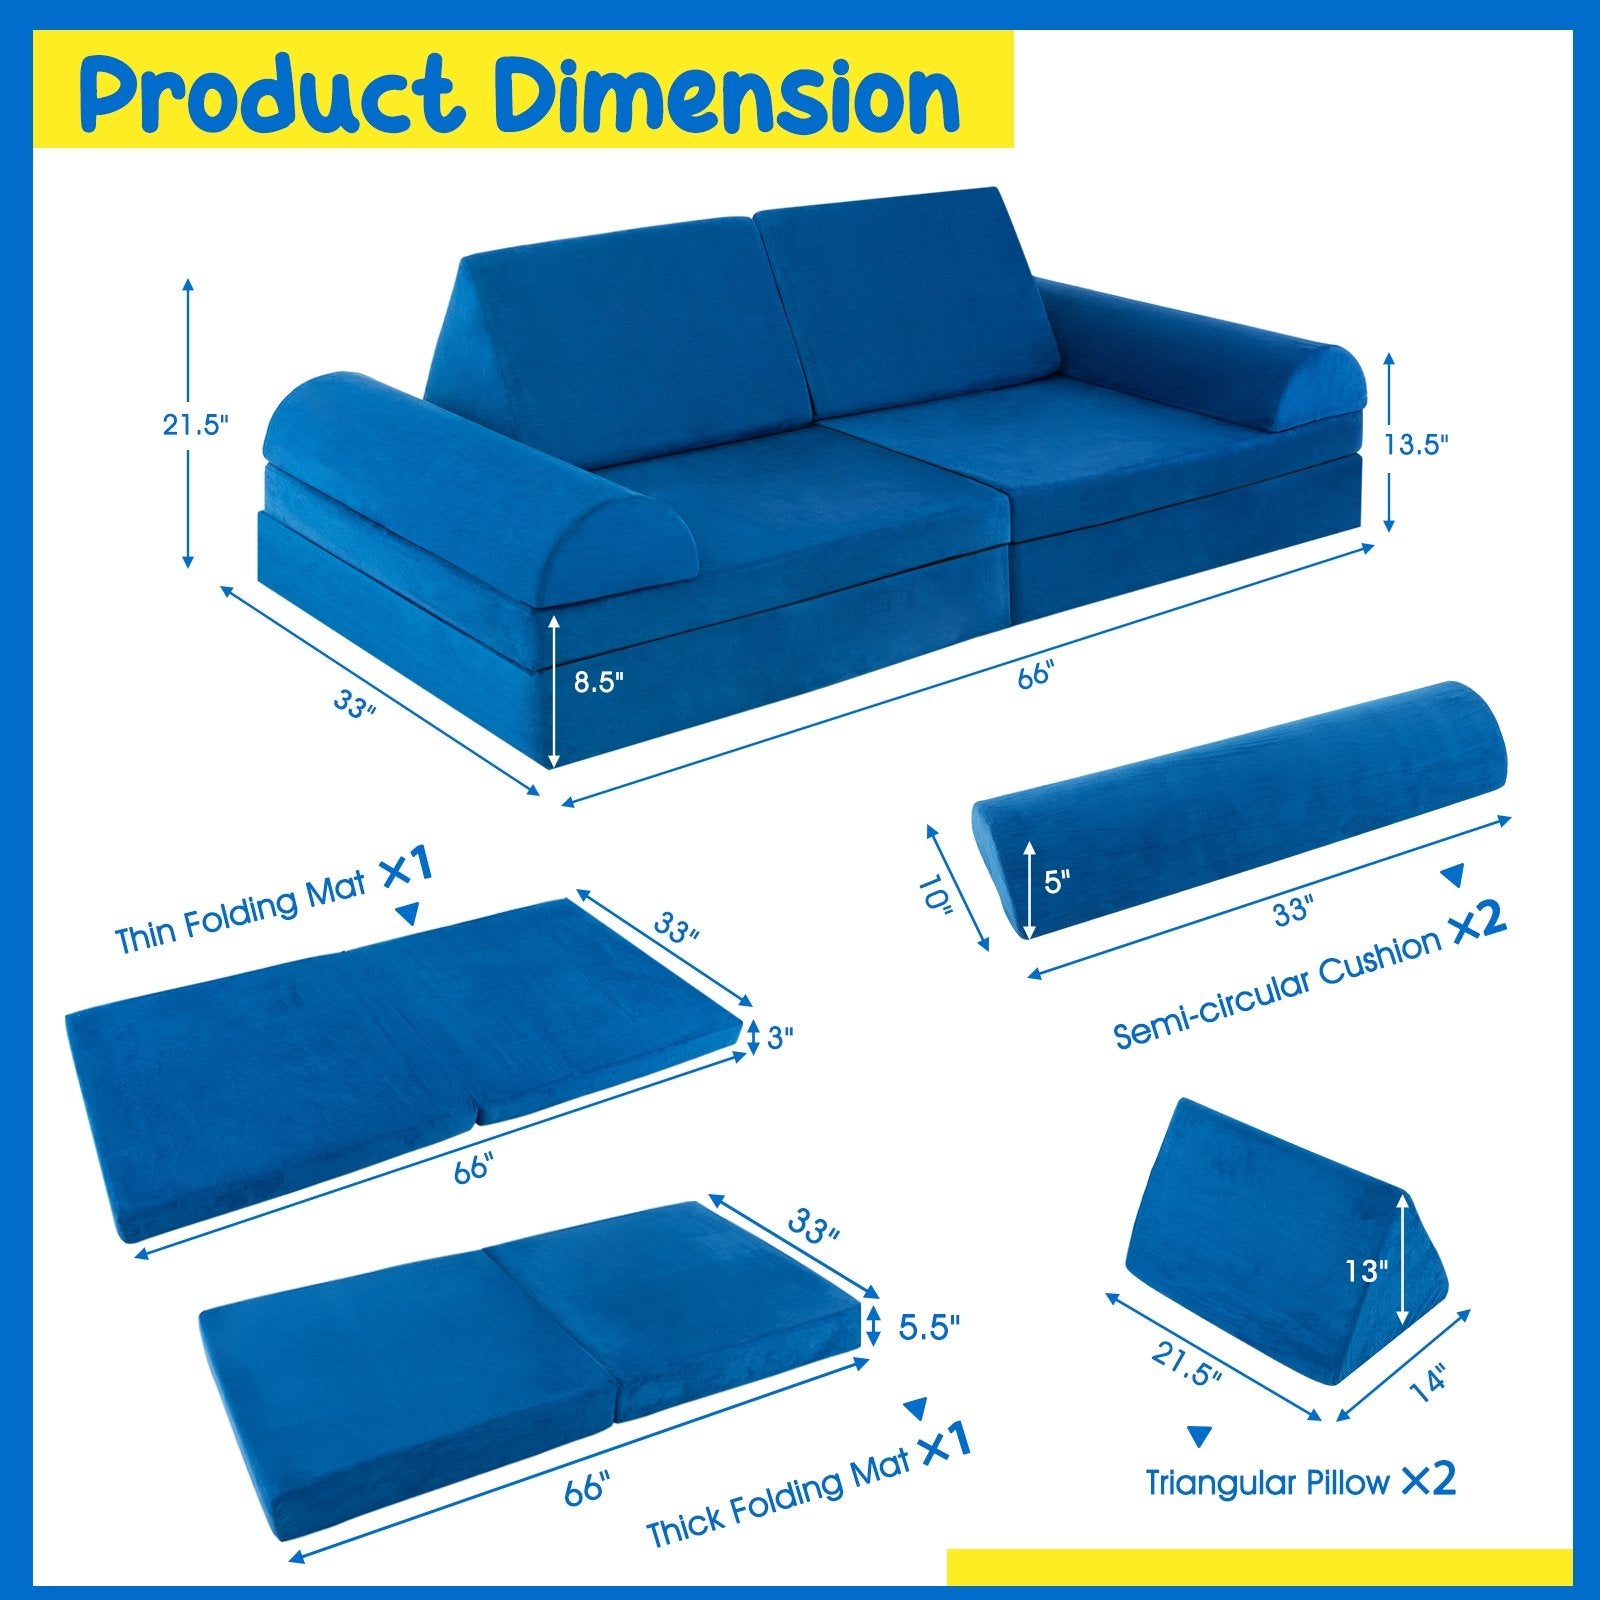 8 Pieces Convertible Kids Sofa Playset with Zipper, Blue at Gallery Canada